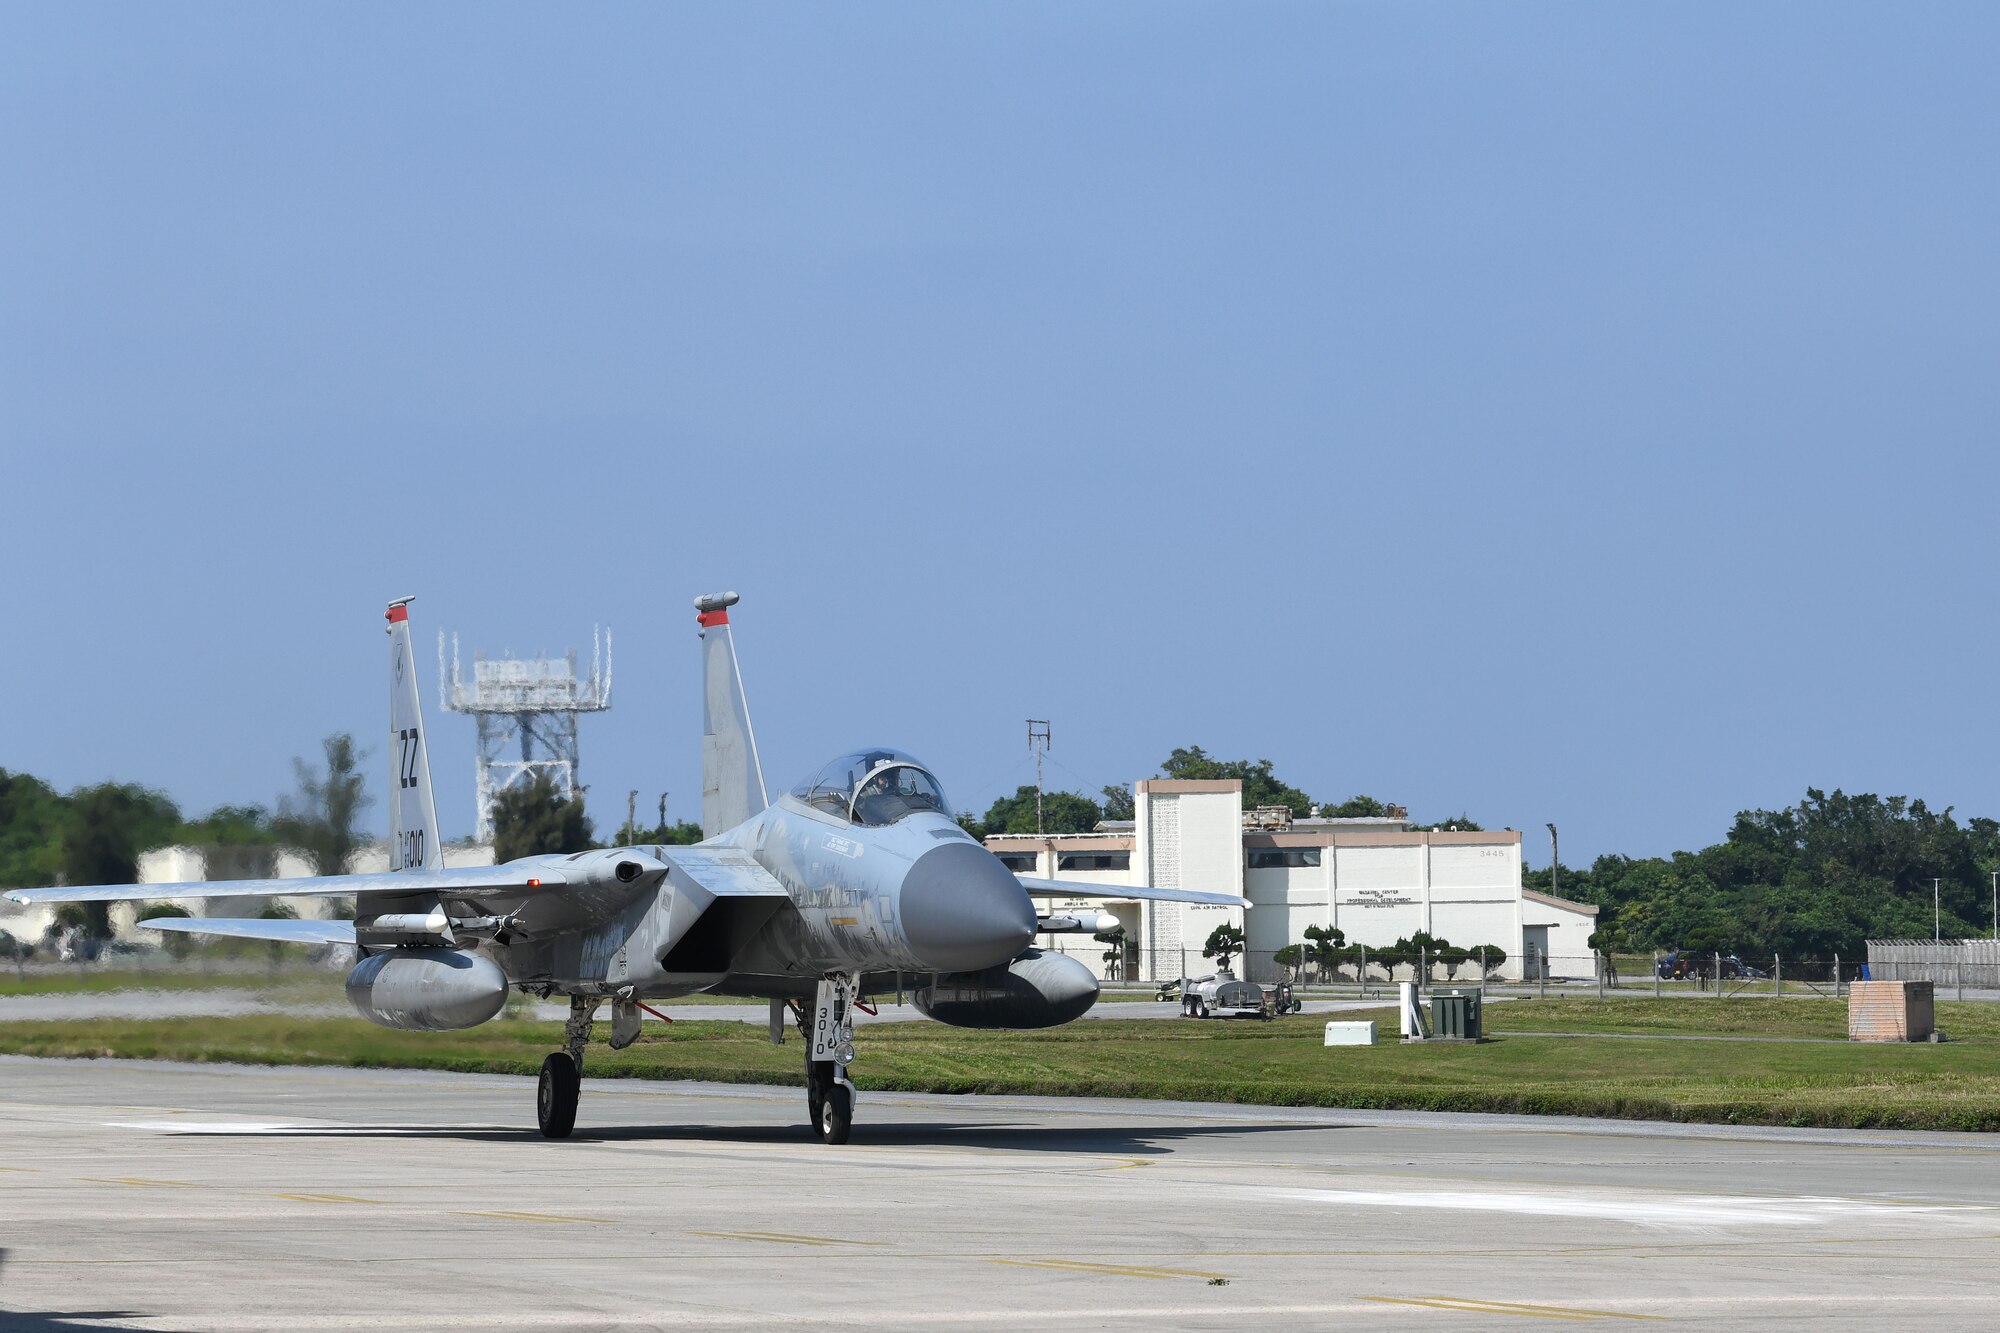 An F-15C Eagle taxi down the runway on Kadena Air Base, Japan, April 17, 2020. The F-15C Eagle is a maneuverable, tactical fighter designed to gain and maintain air supremacy over the battlefield. In order to ensure mission success, the Airmen of Team Kadena continuously rise to meet mission requirements and ensure air superiority. (U.S. Air Force photo by Airman 1st Class Rebeckah Medeiros)